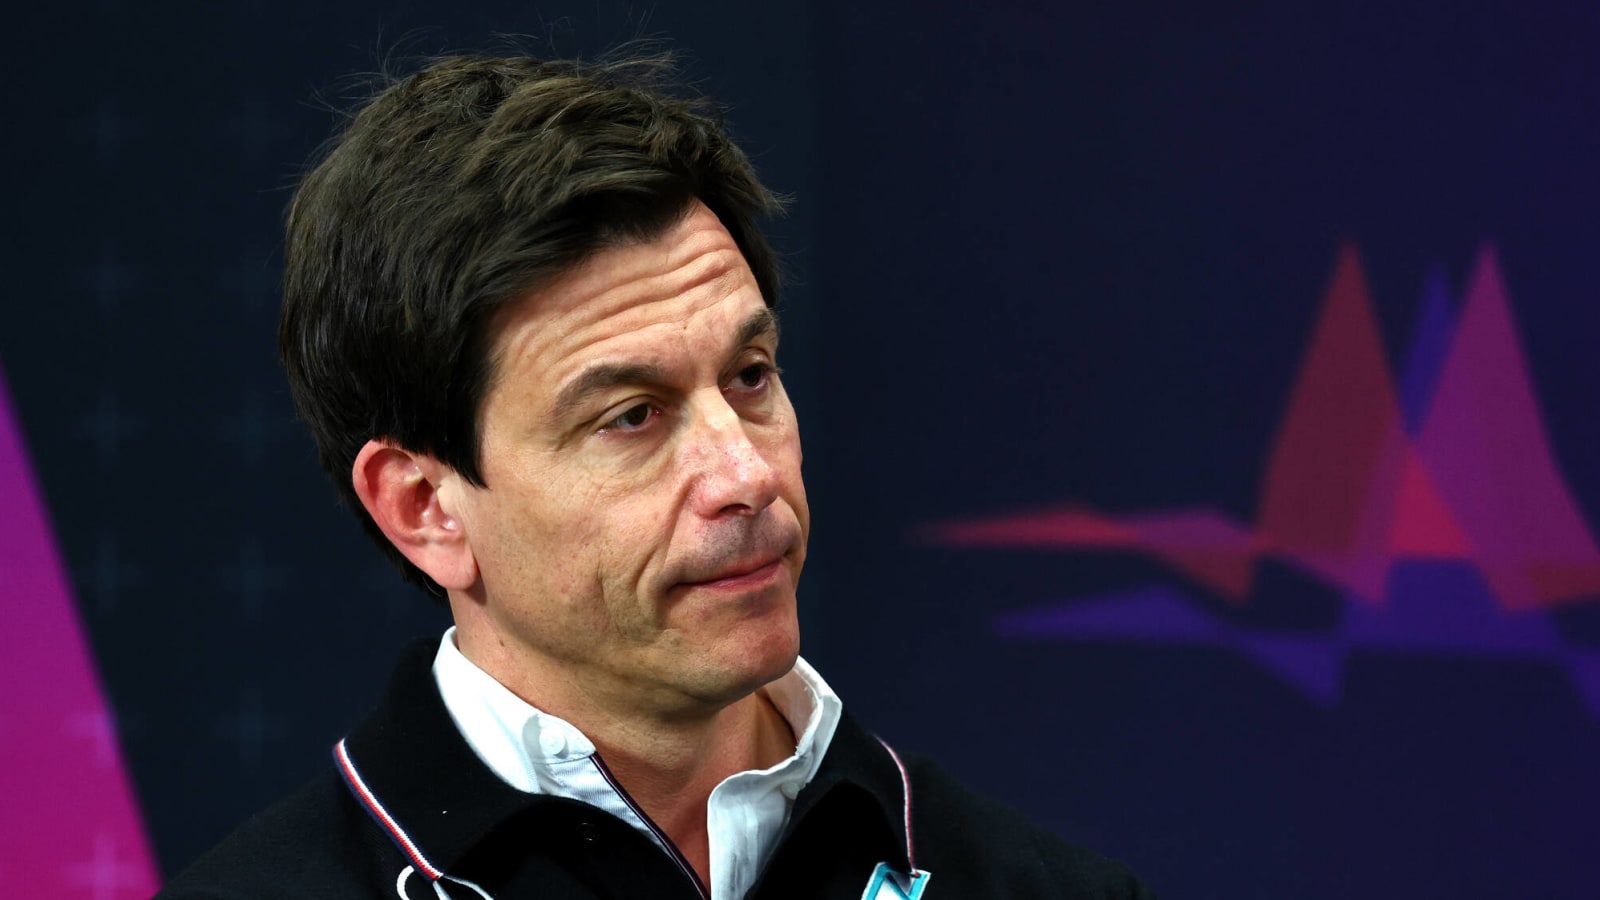 'Behind closed doors,' Toto Wolff breaks silence on his rumored Miami meeting with Max Verstappen regarding a Mercedes deal